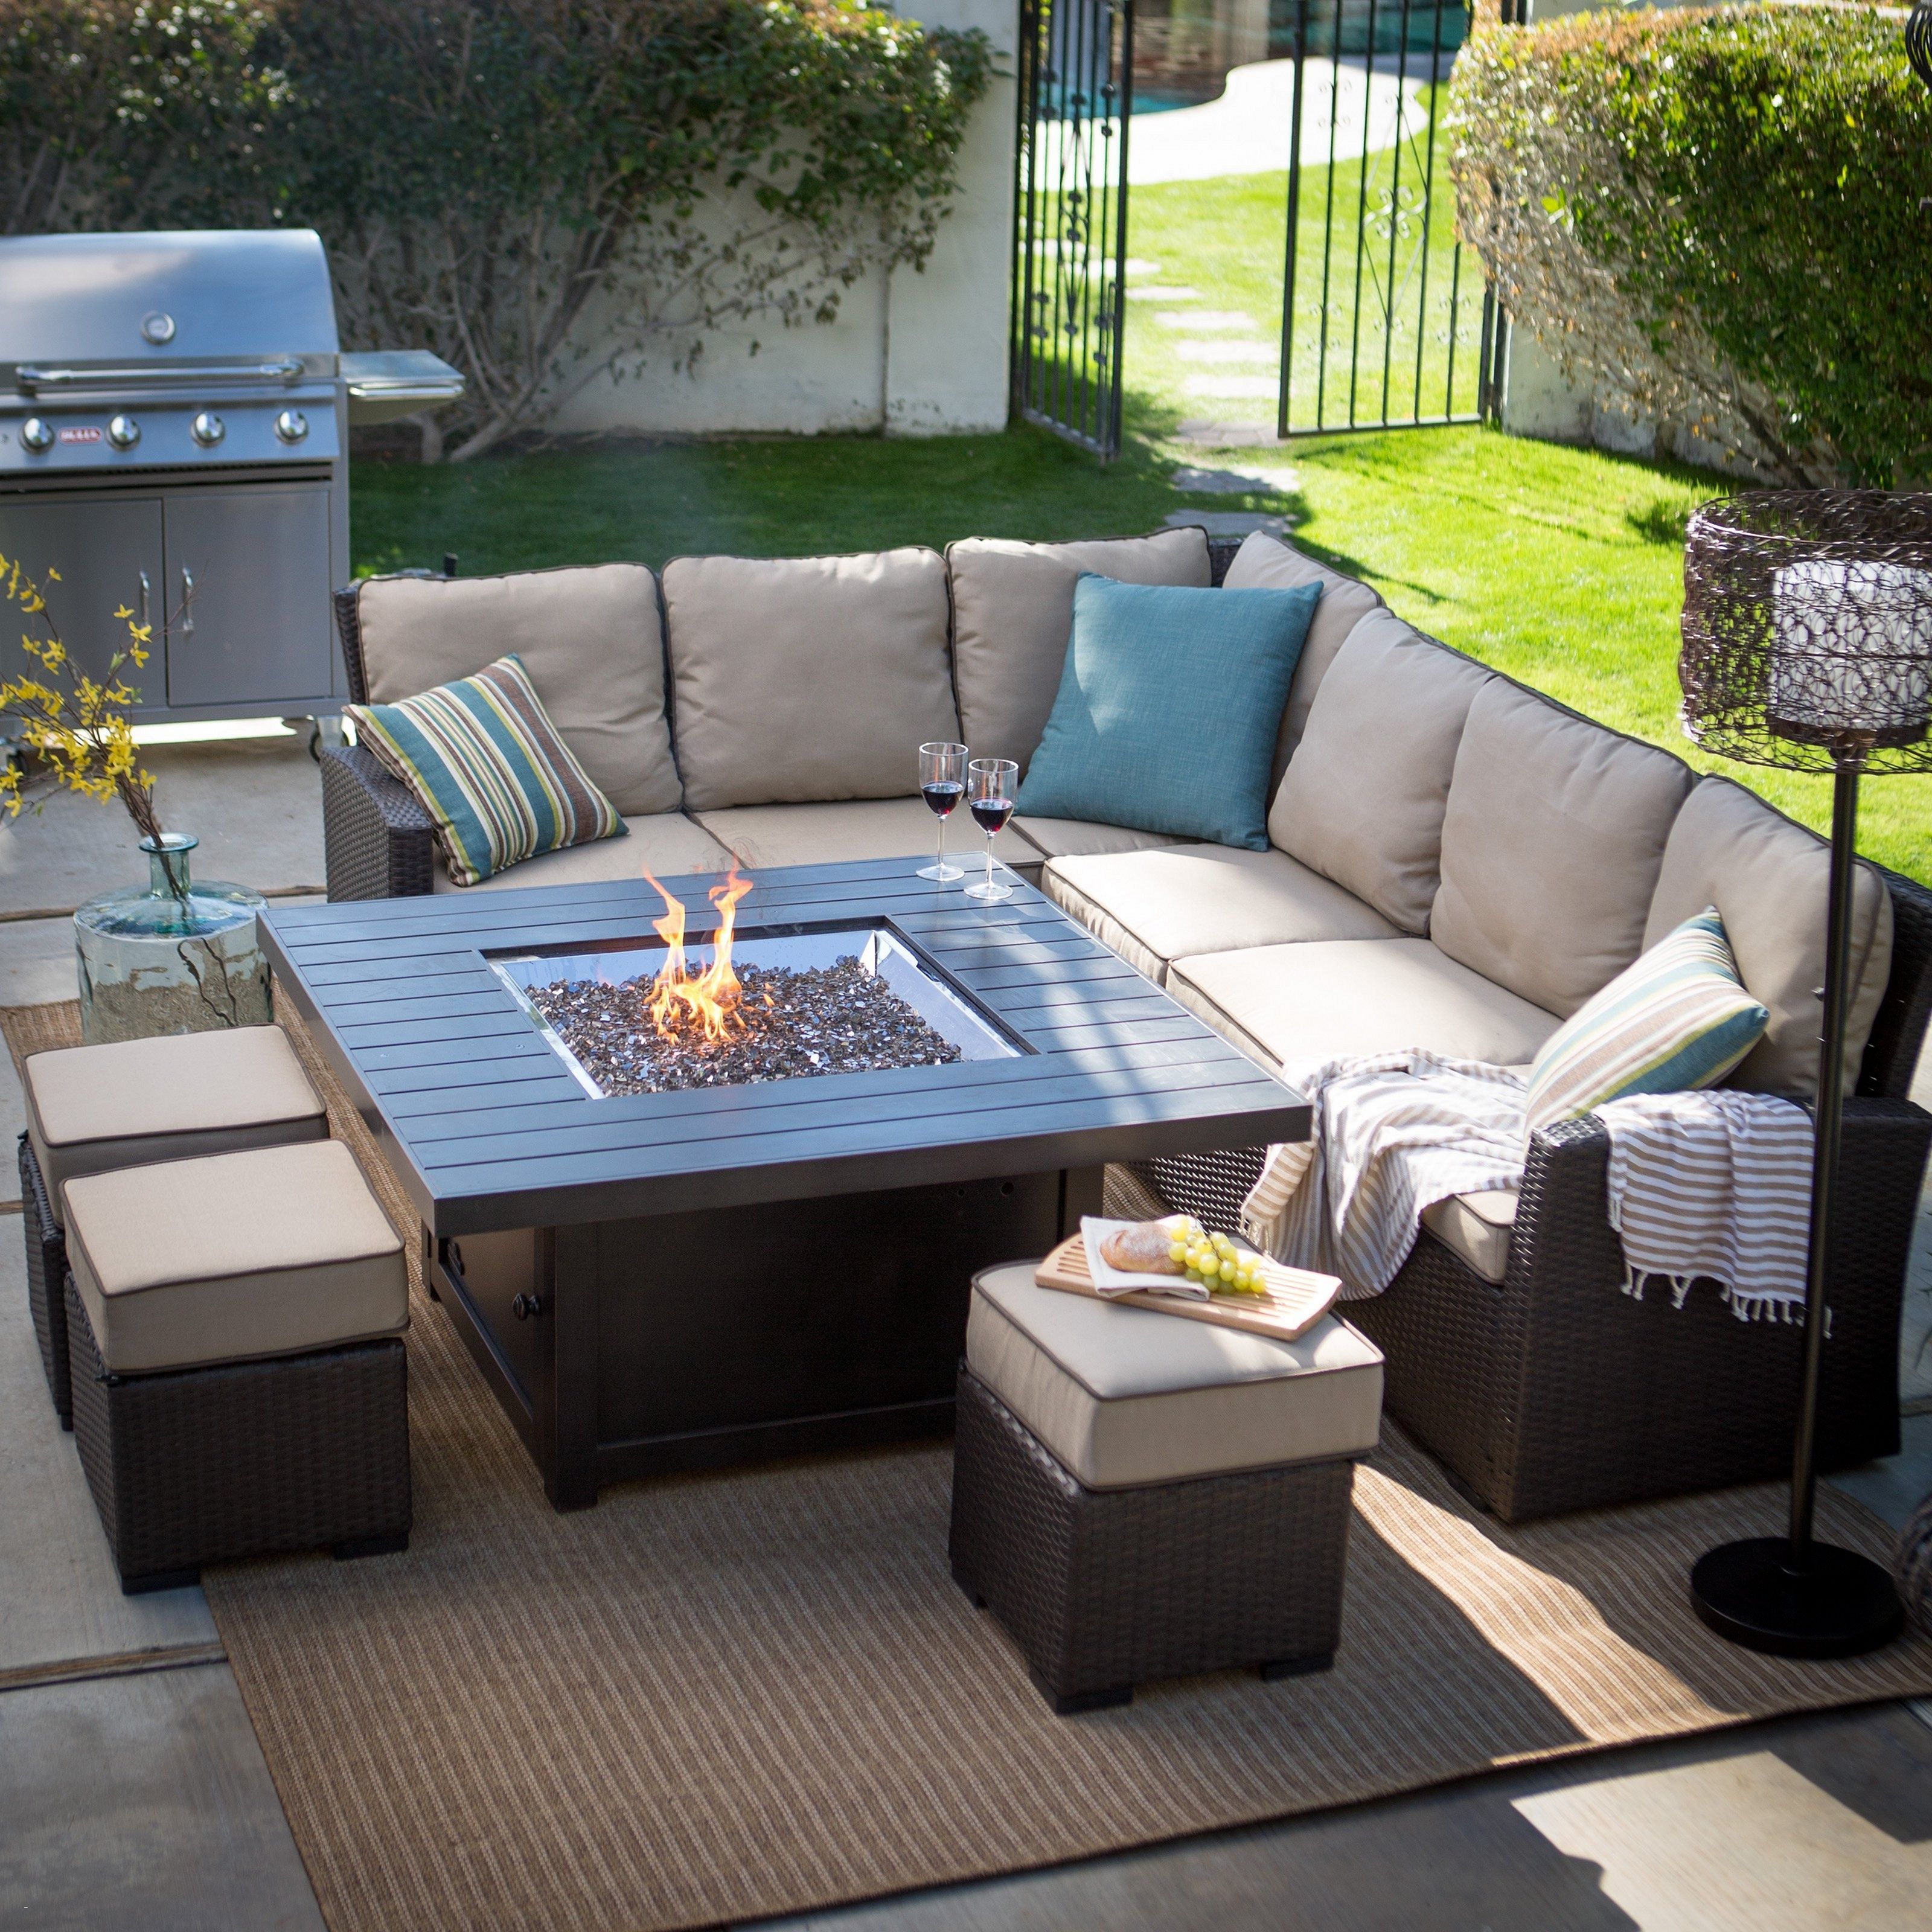 Stylish Outdoor Fire Pit Sets For Cozy Evenings